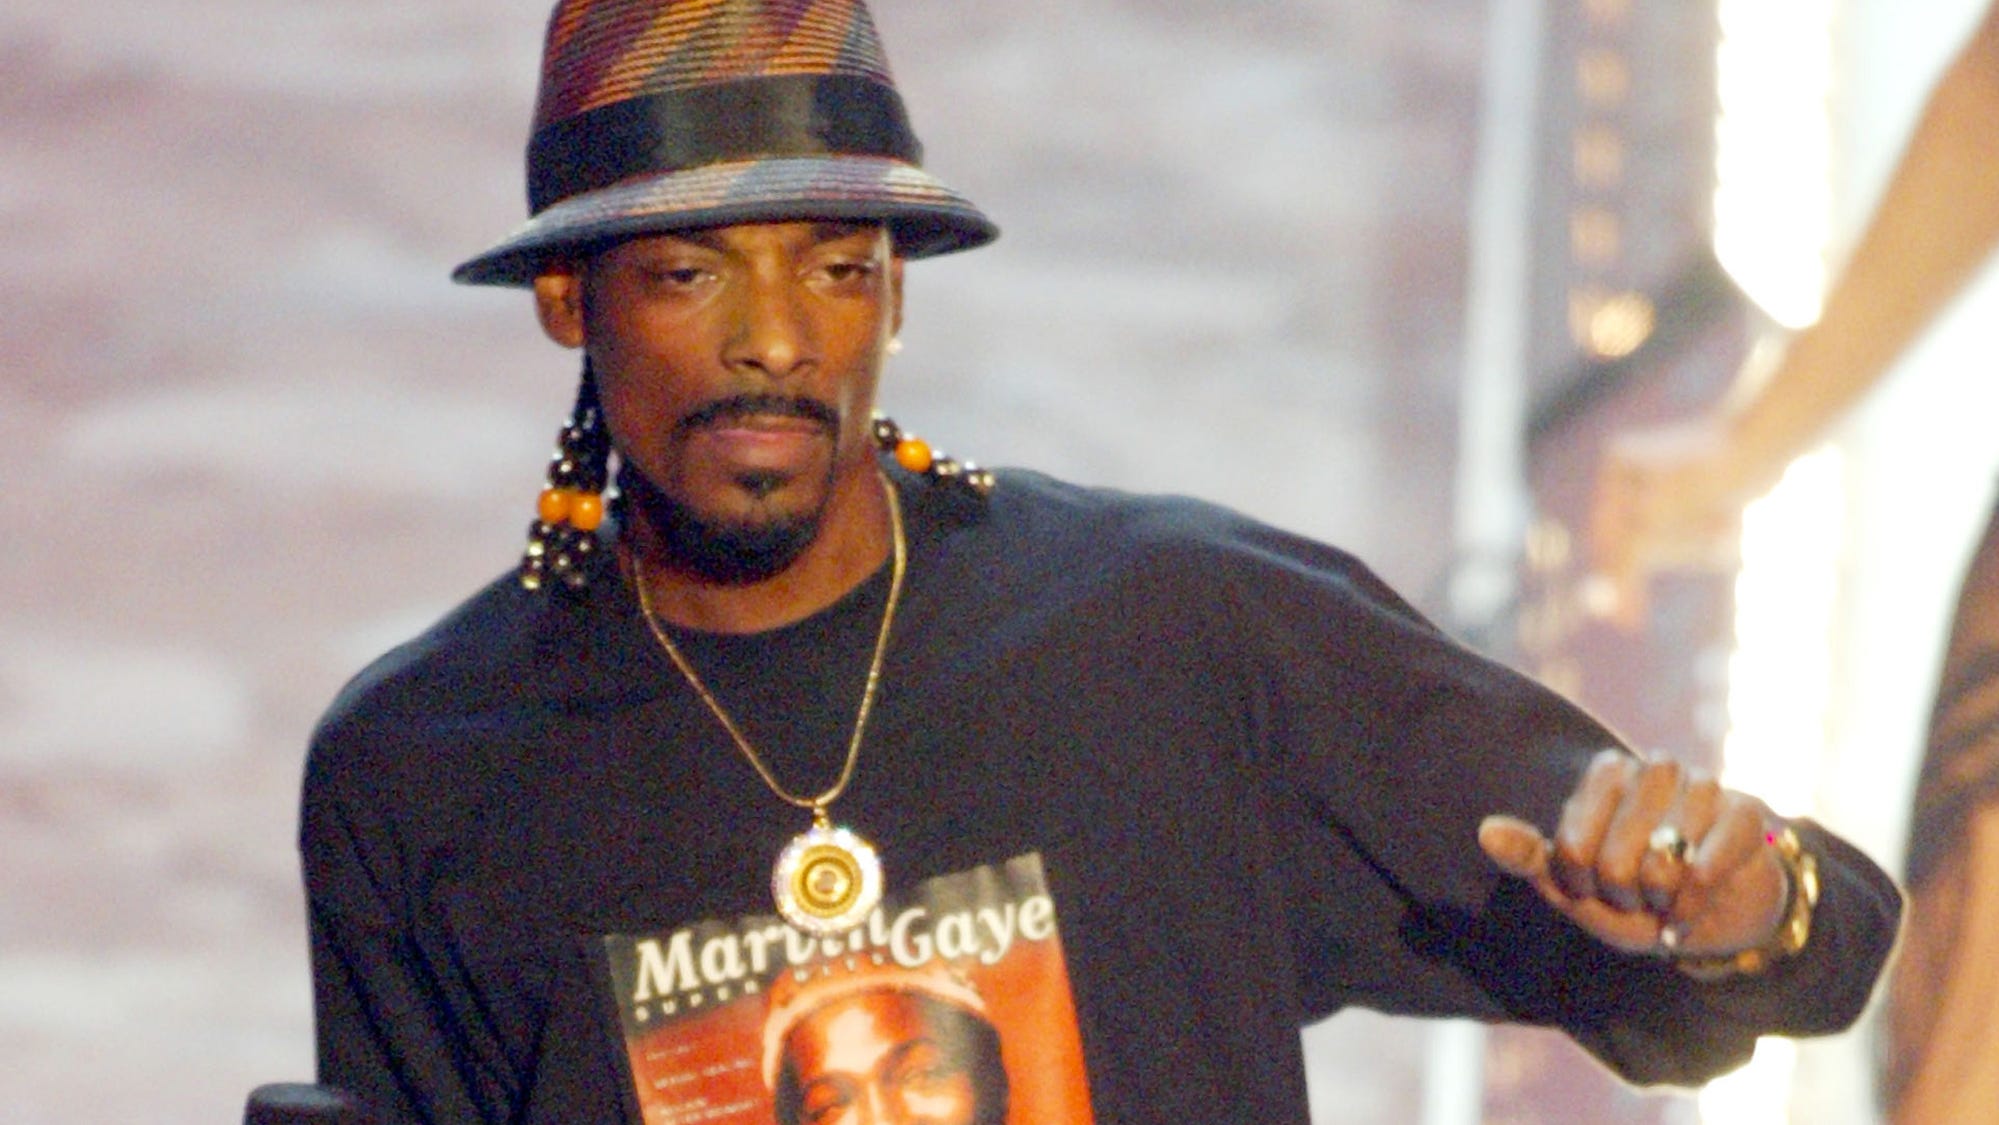 Top rappers of all time: Snoop Dogg gives his awesome list